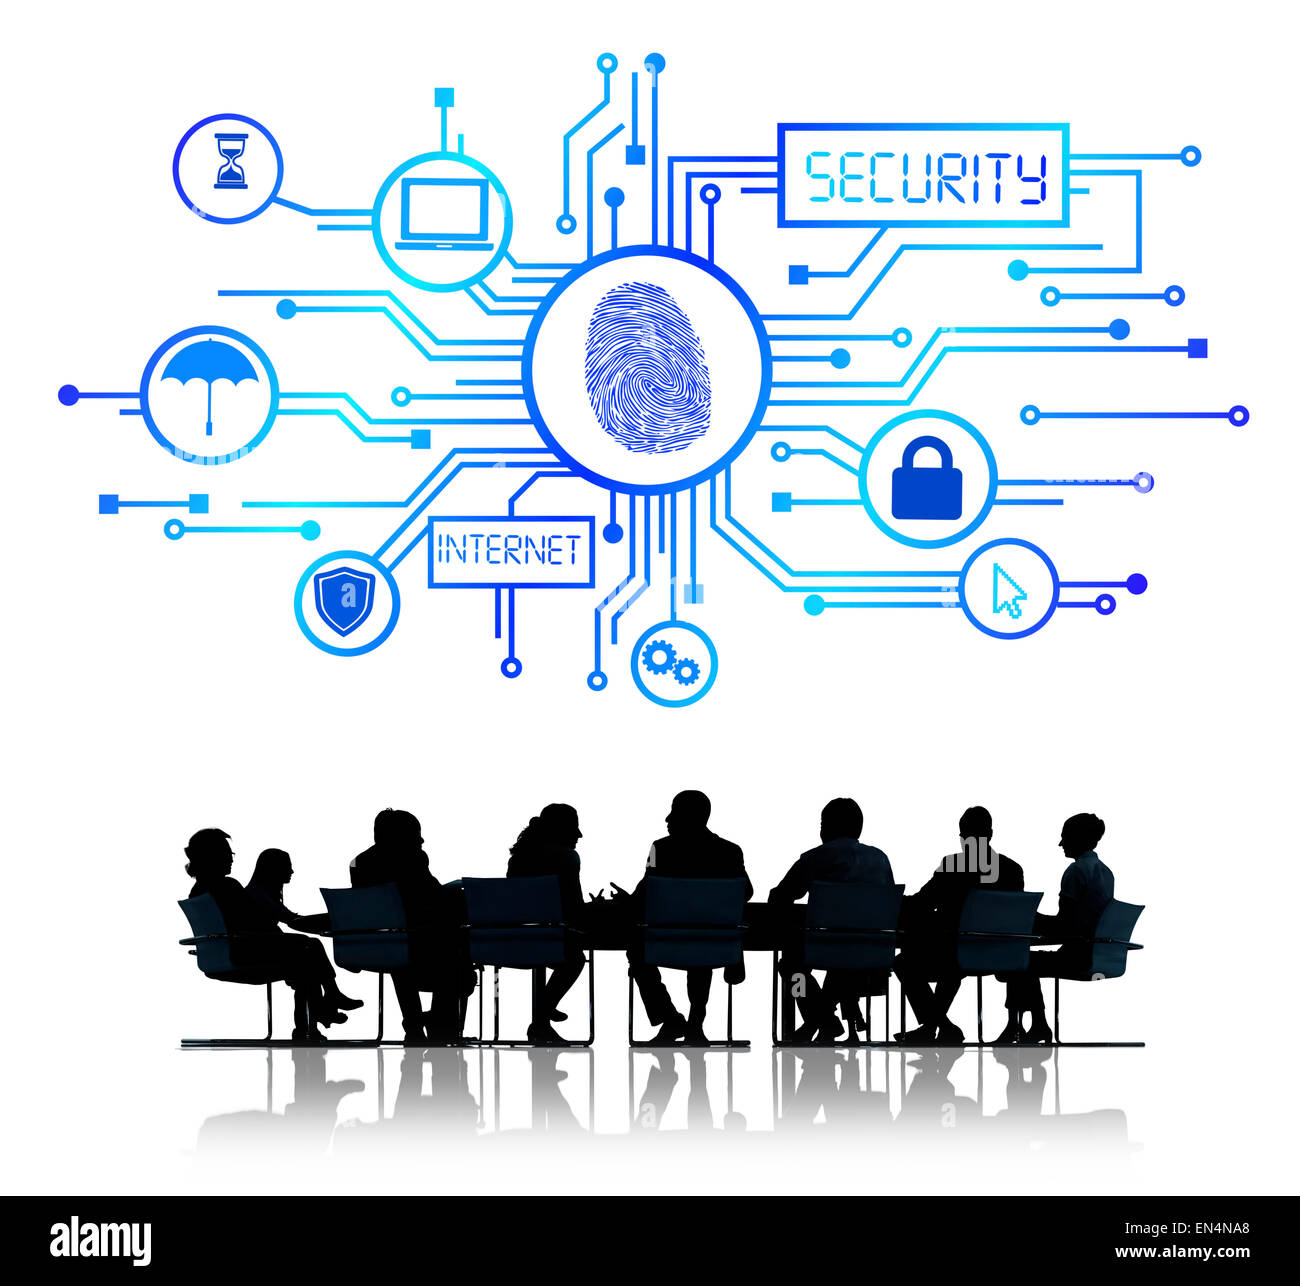 Silhouette Group of People in Meeting with Internet Security Concept Stock Photo